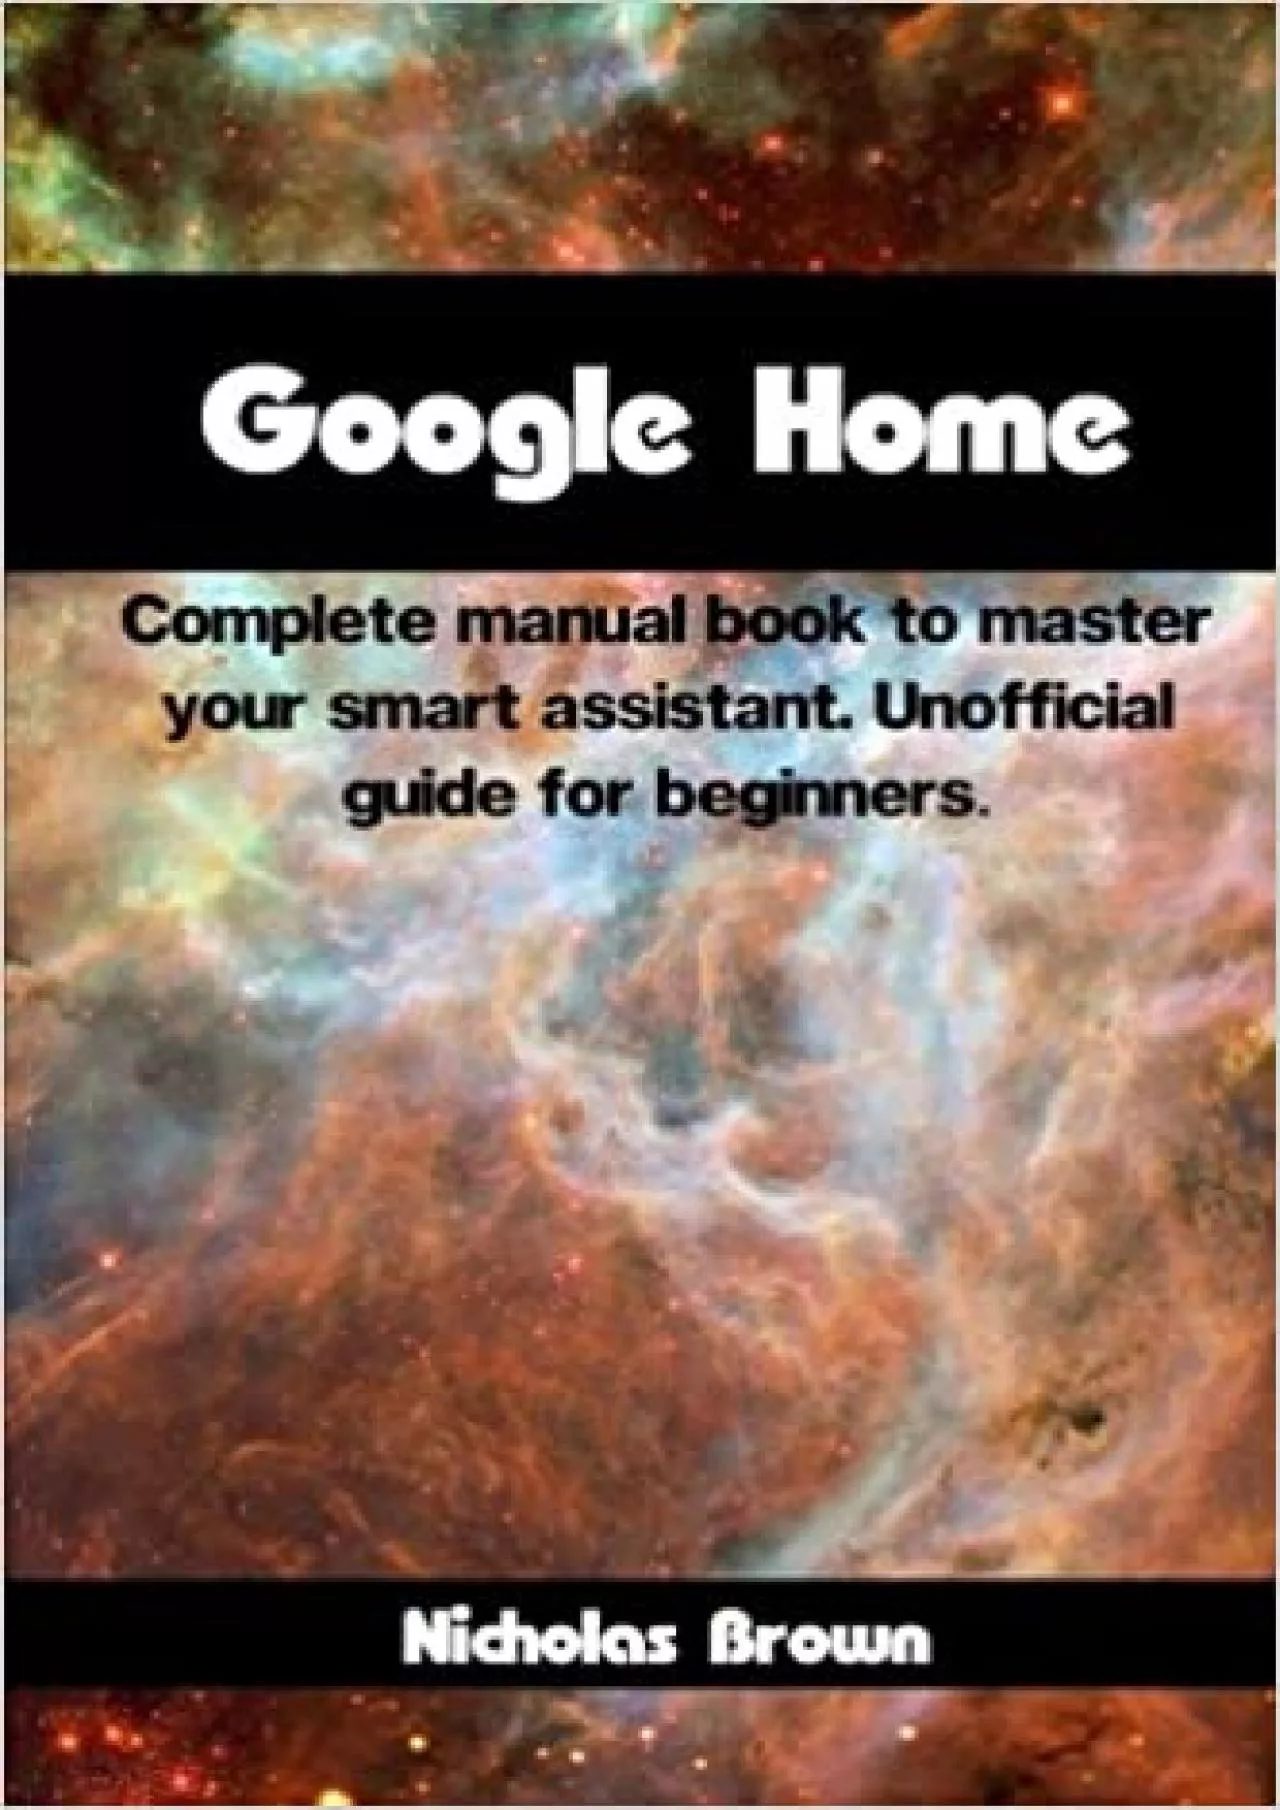 Google Home Complete Manual Book to Master Your Smart Assistant. Unofficial Guide for